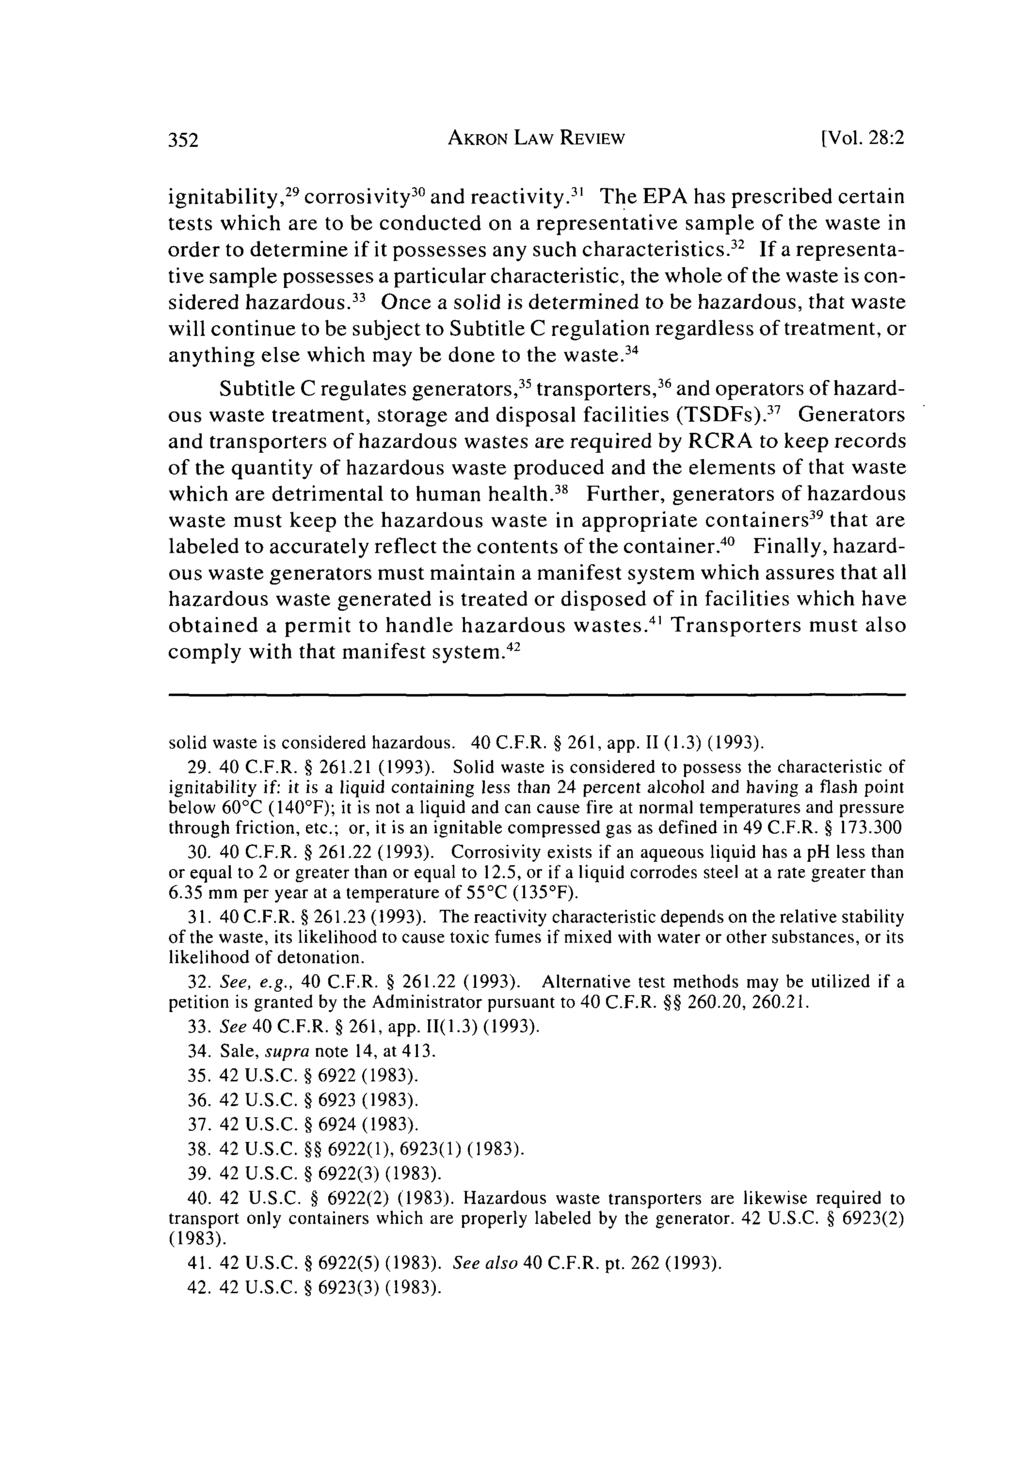 Akron Law Review, Vol. 28 [1995], Iss. 2, Art. 8 AKRON LAW REVIEW [Vol. 28:2 ignitability, 29 corrosivity 3 and reactivity.